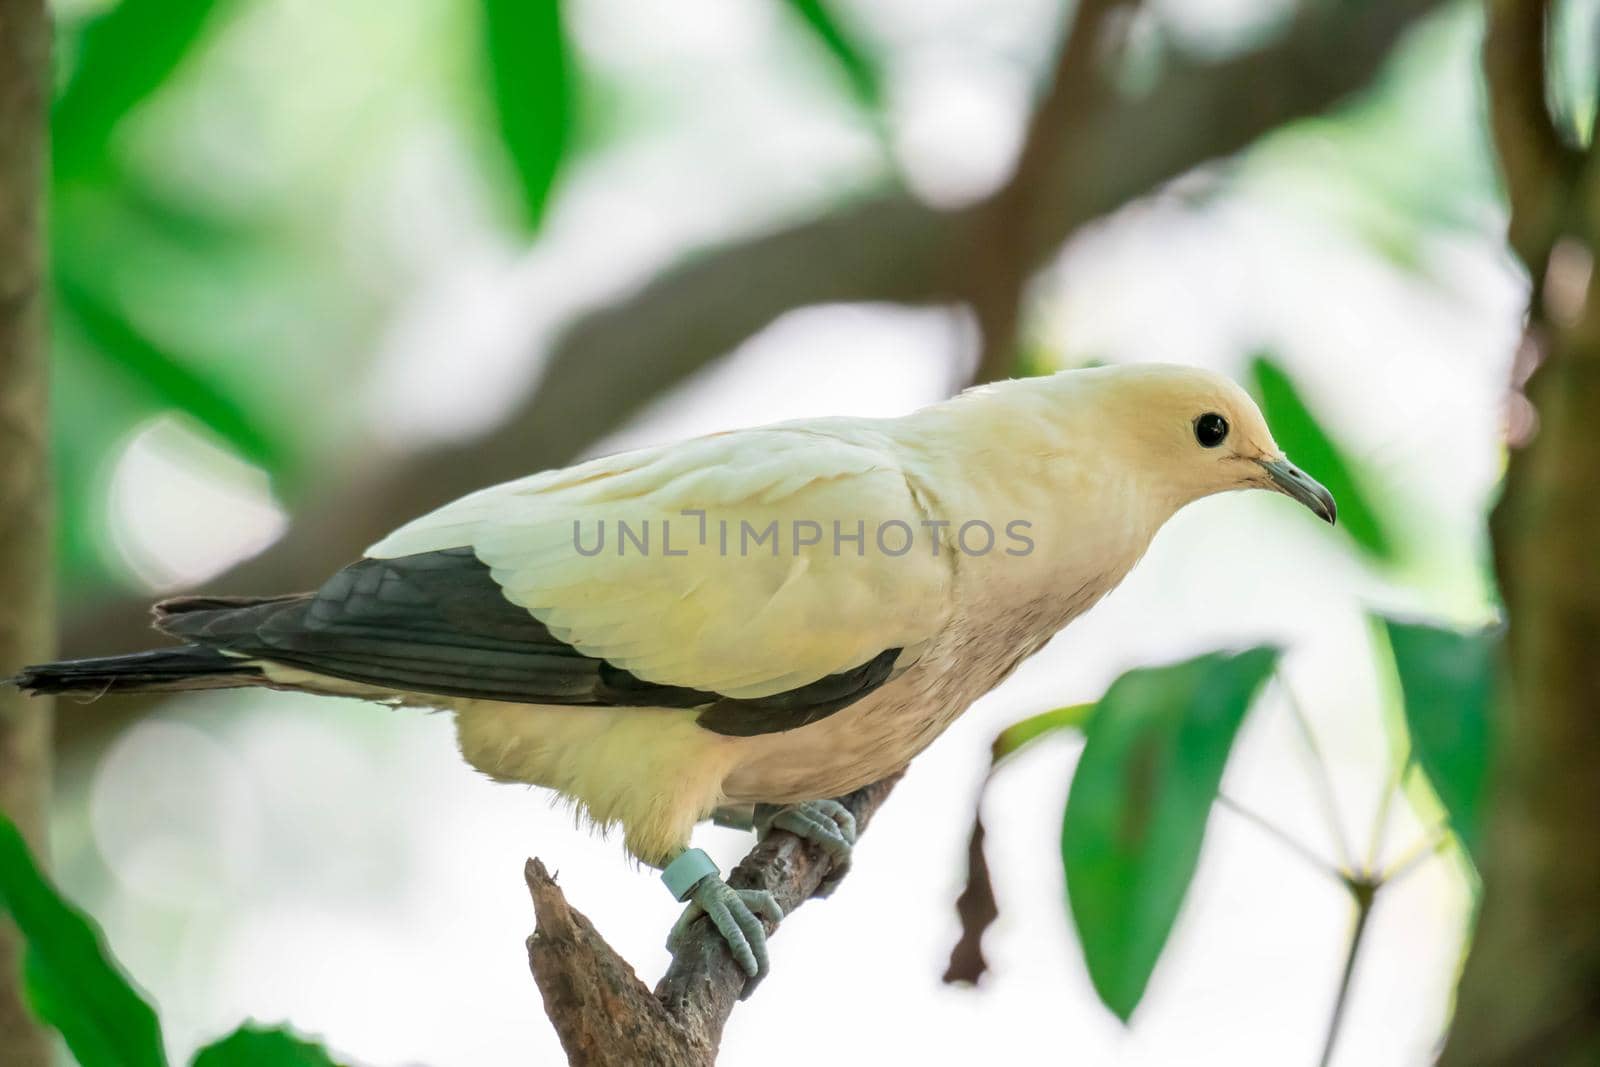 Pied imperial pigeon (Ducula bicolor)stand on the branch. It is a relatively large, pied species of pigeon. It is found in forest, woodland, mangrove, plantations and scrub in Southeast Asia